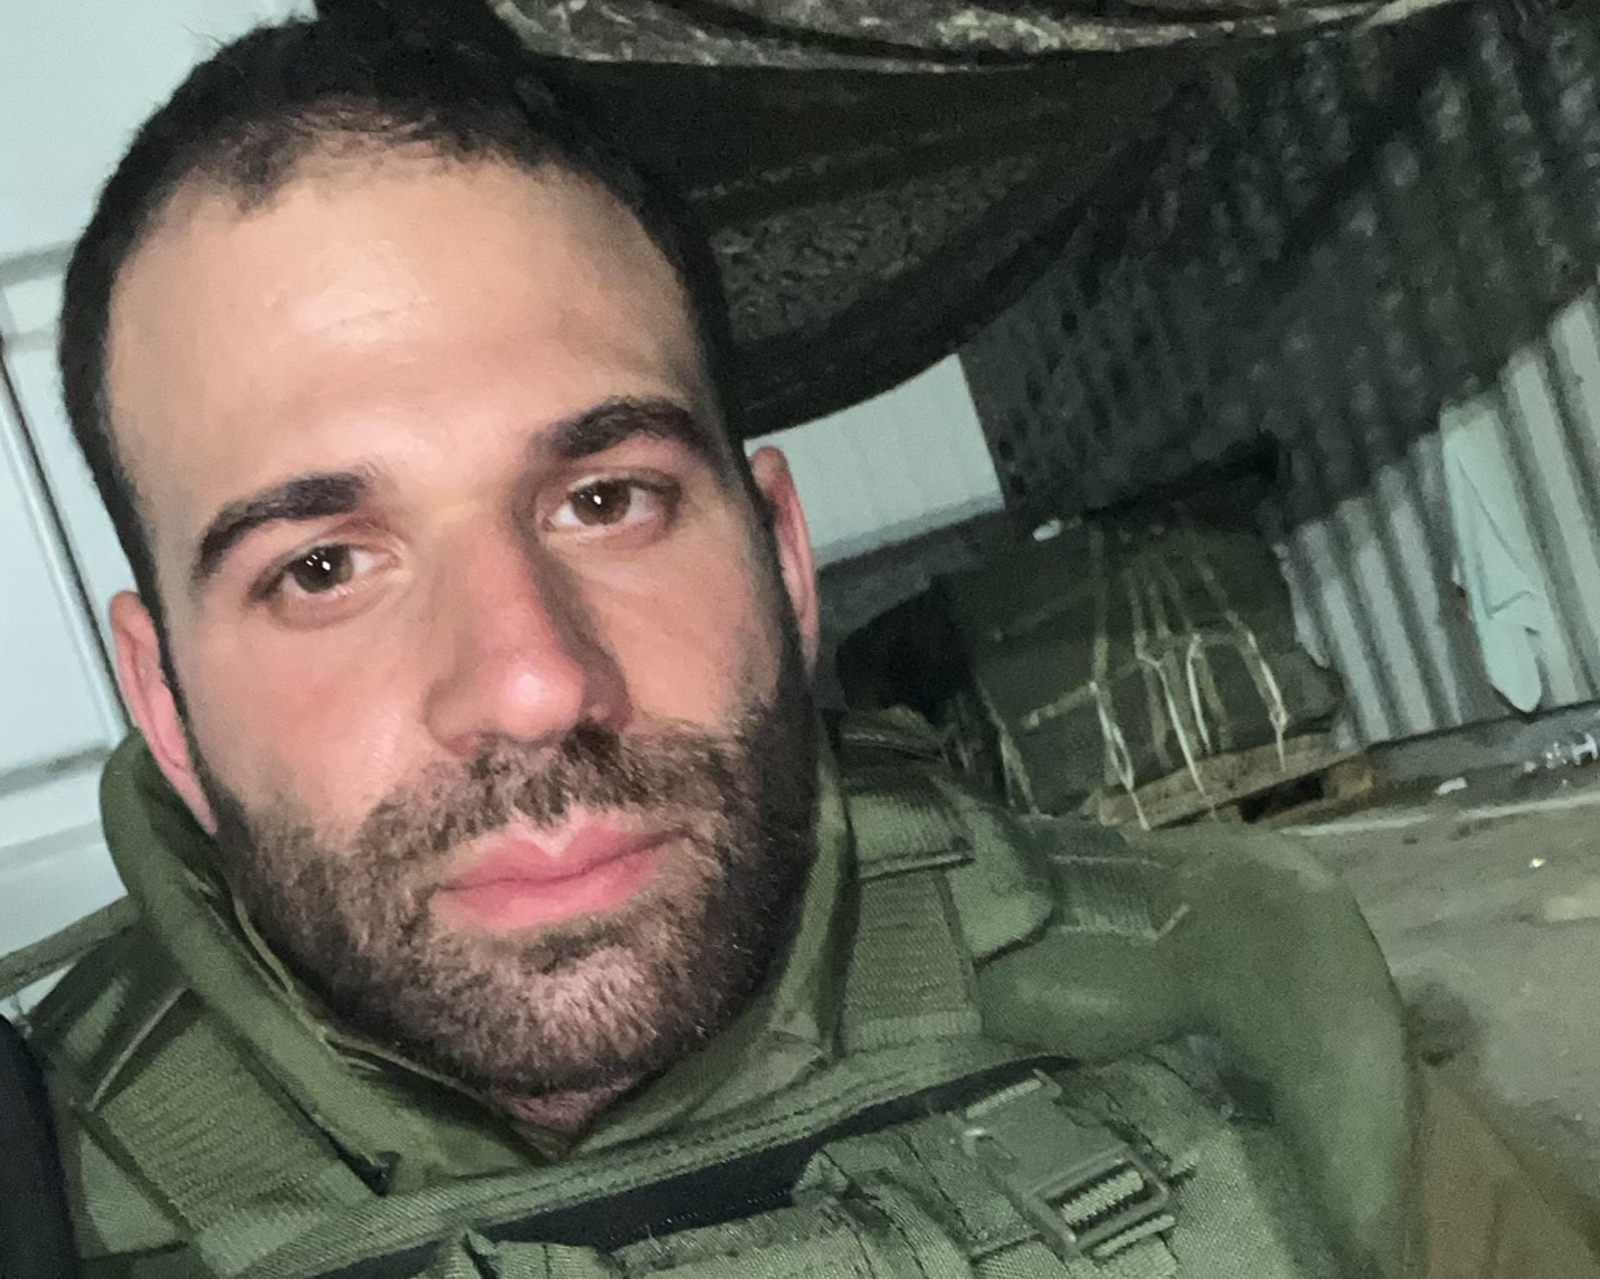 Noy Leyb left his home in New York and headed to Israel to fight in the military following the Hamas terrorist attack.